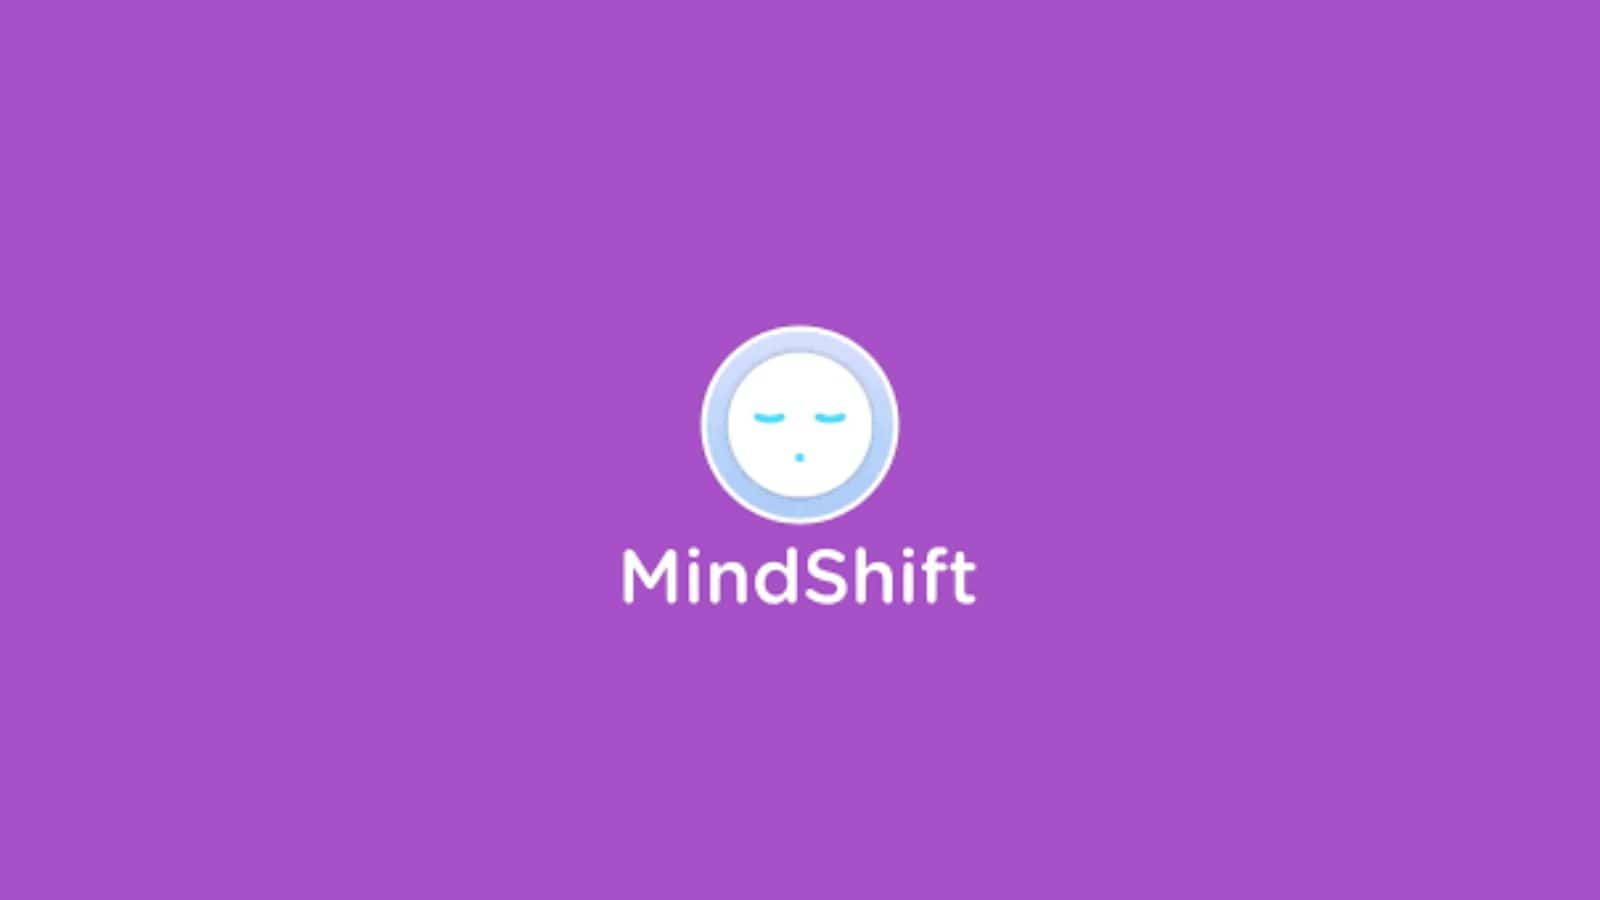 <p>Is anxiety getting in the way of your life? <a href="https://www.anxietycanada.com/resources/mindshift-cbt/" rel="noopener external noreferrer">MindShift CBT</a>uses scientifically proven strategies based on Cognitive Behavioral Therapy (CBT) to help you learn to relax and be mindful. It’s a tool for tackling fear and anxiety. It allows users shift their mindset towards a more positive outlook, enhancing their resilience and overall mental well-being.</p>